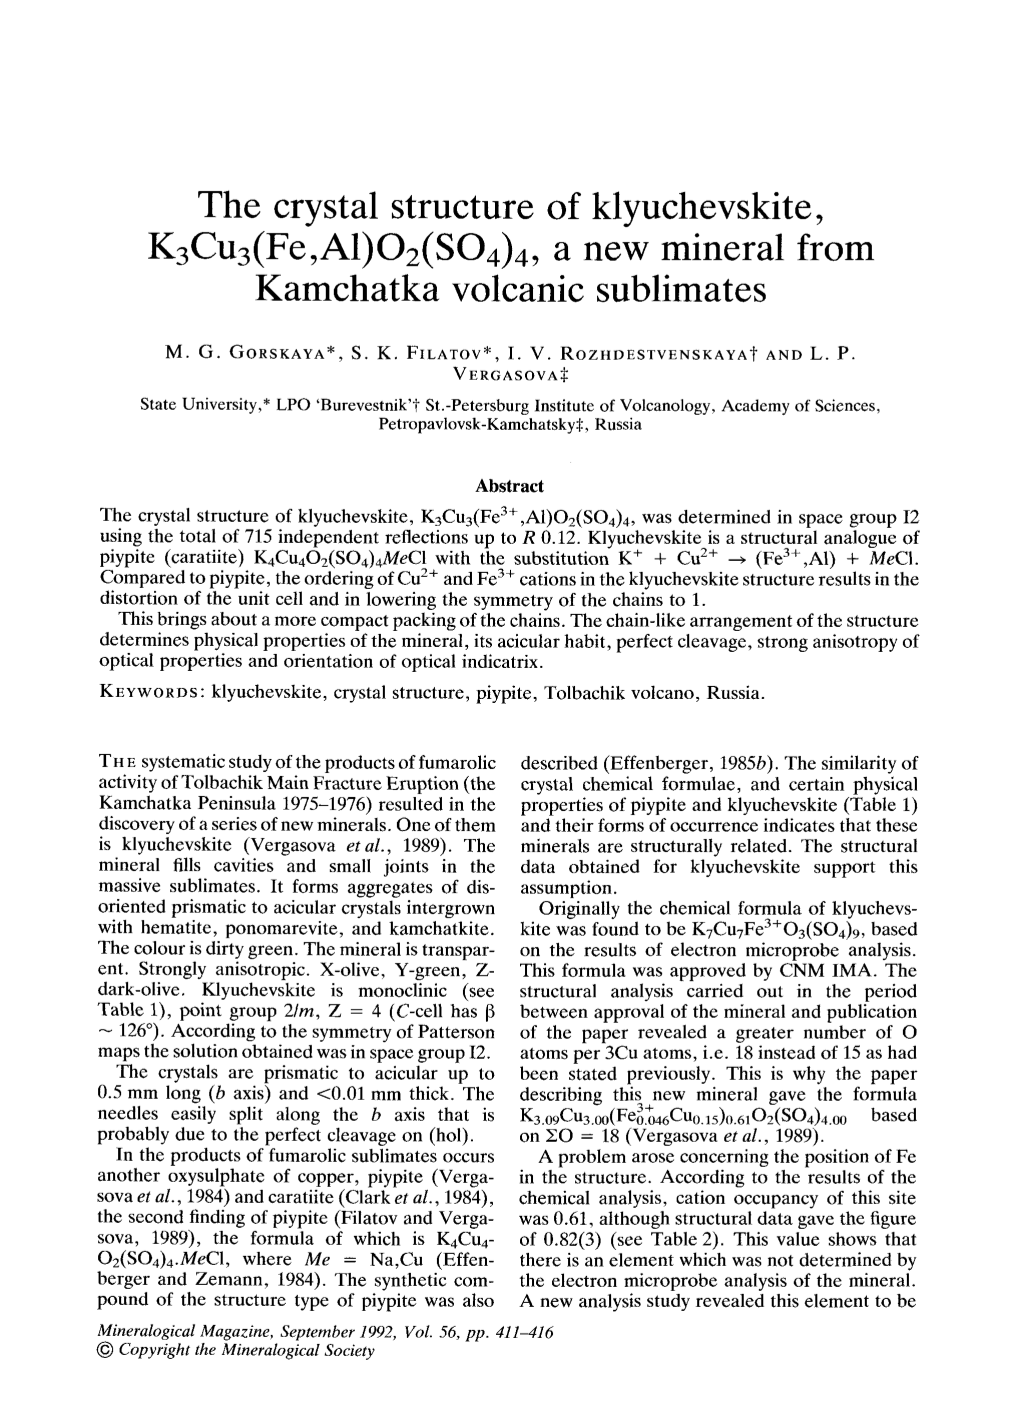 The Crystal Structure of Klyuchevskite, K3cu3(Fe,A1)O2(SO4)4, a New Mineral from Kamchatka Volcanic Sublimates